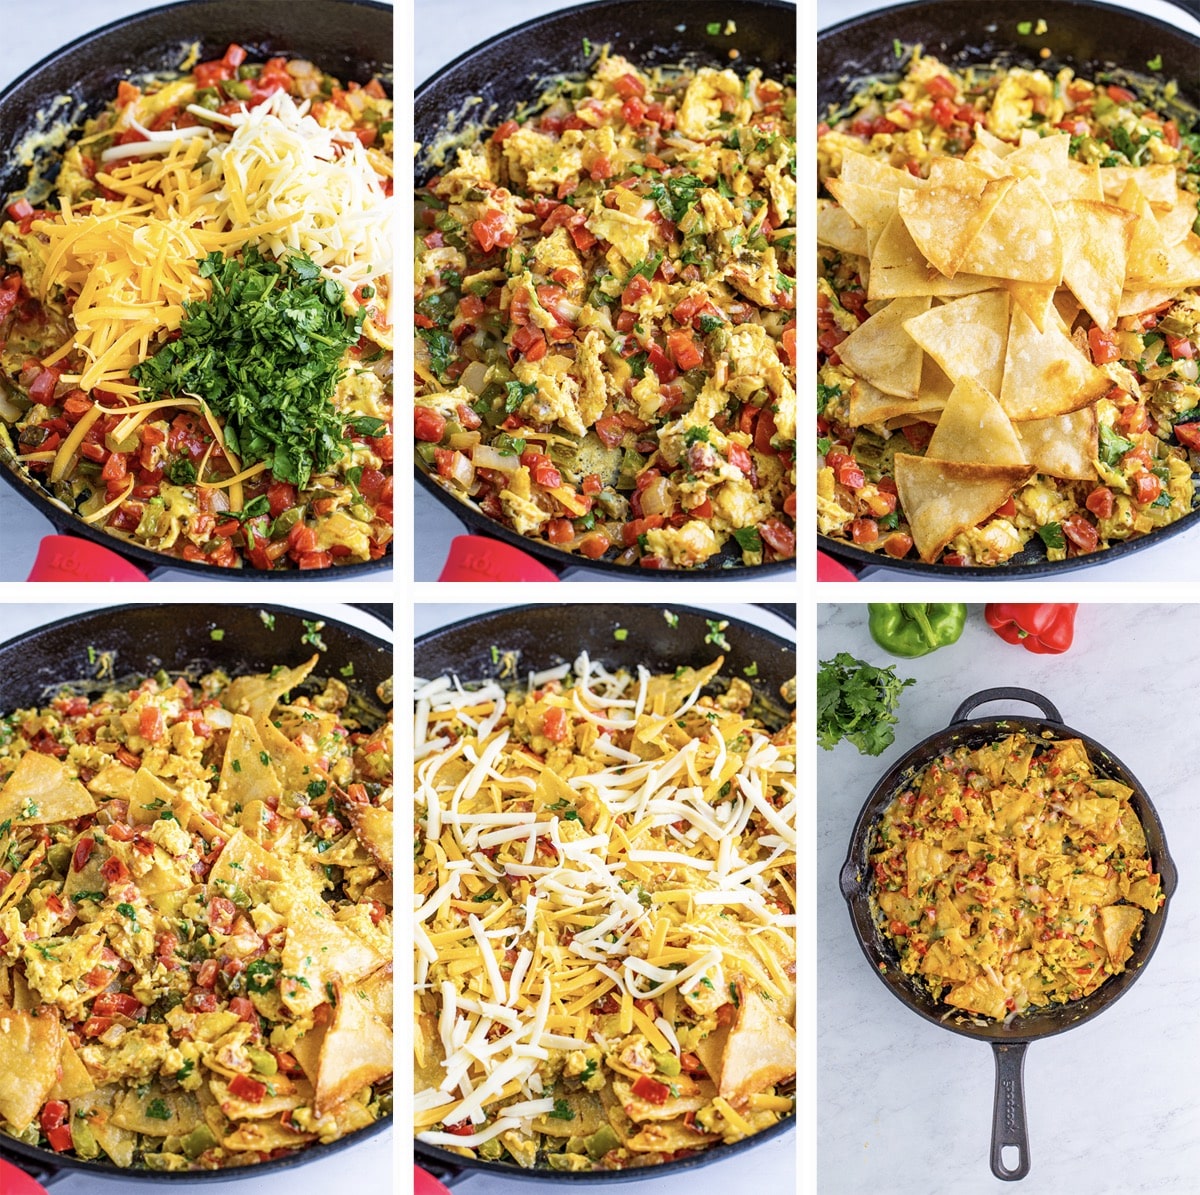 Collage of images showing the final steps on how to make Migas Breakfast on gray marble table top